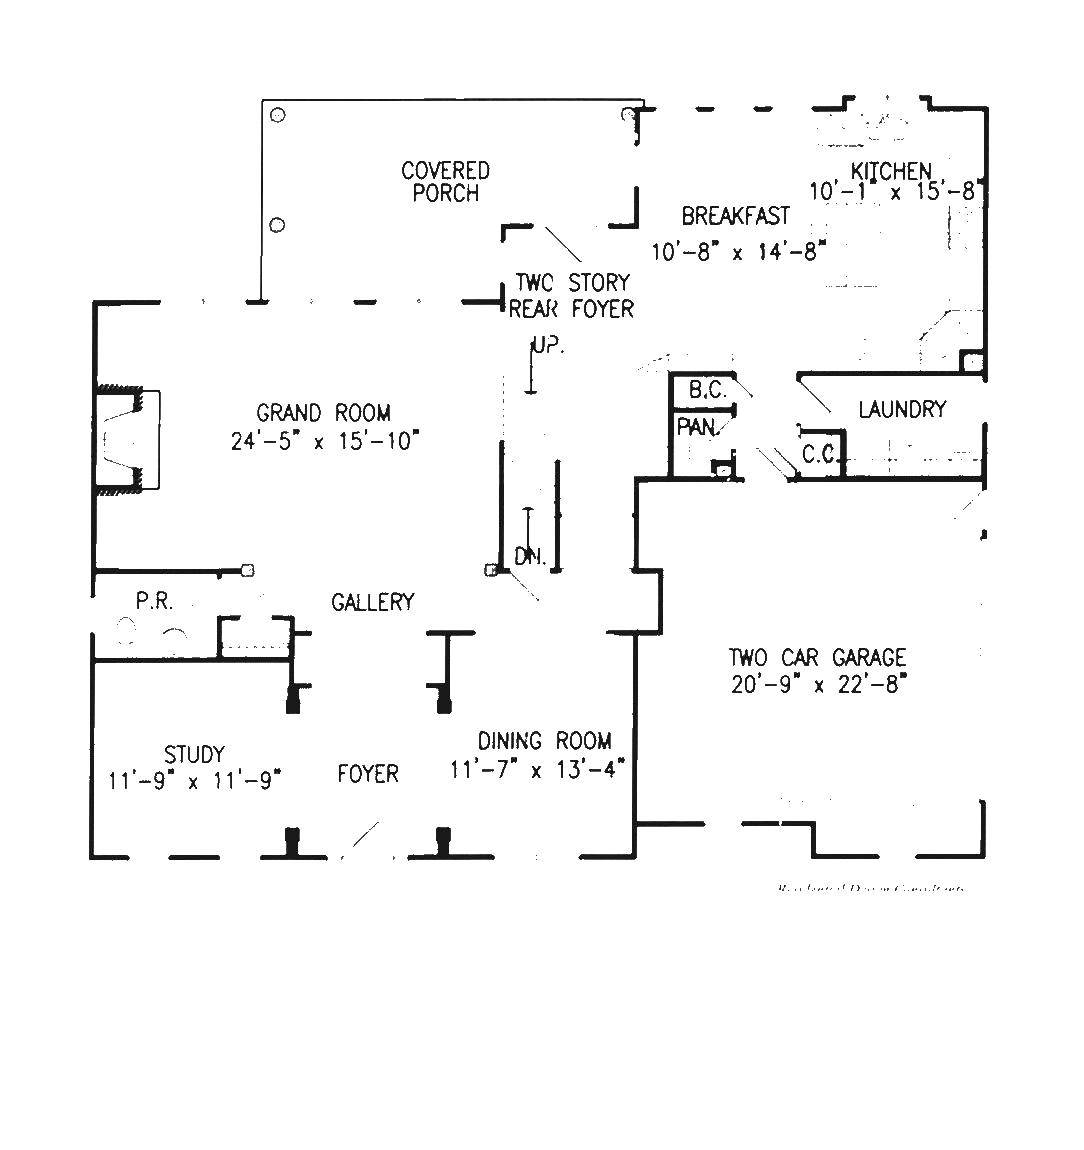 Coloring The layout of the property. Category Bedroom. Tags:  diagram of the building.